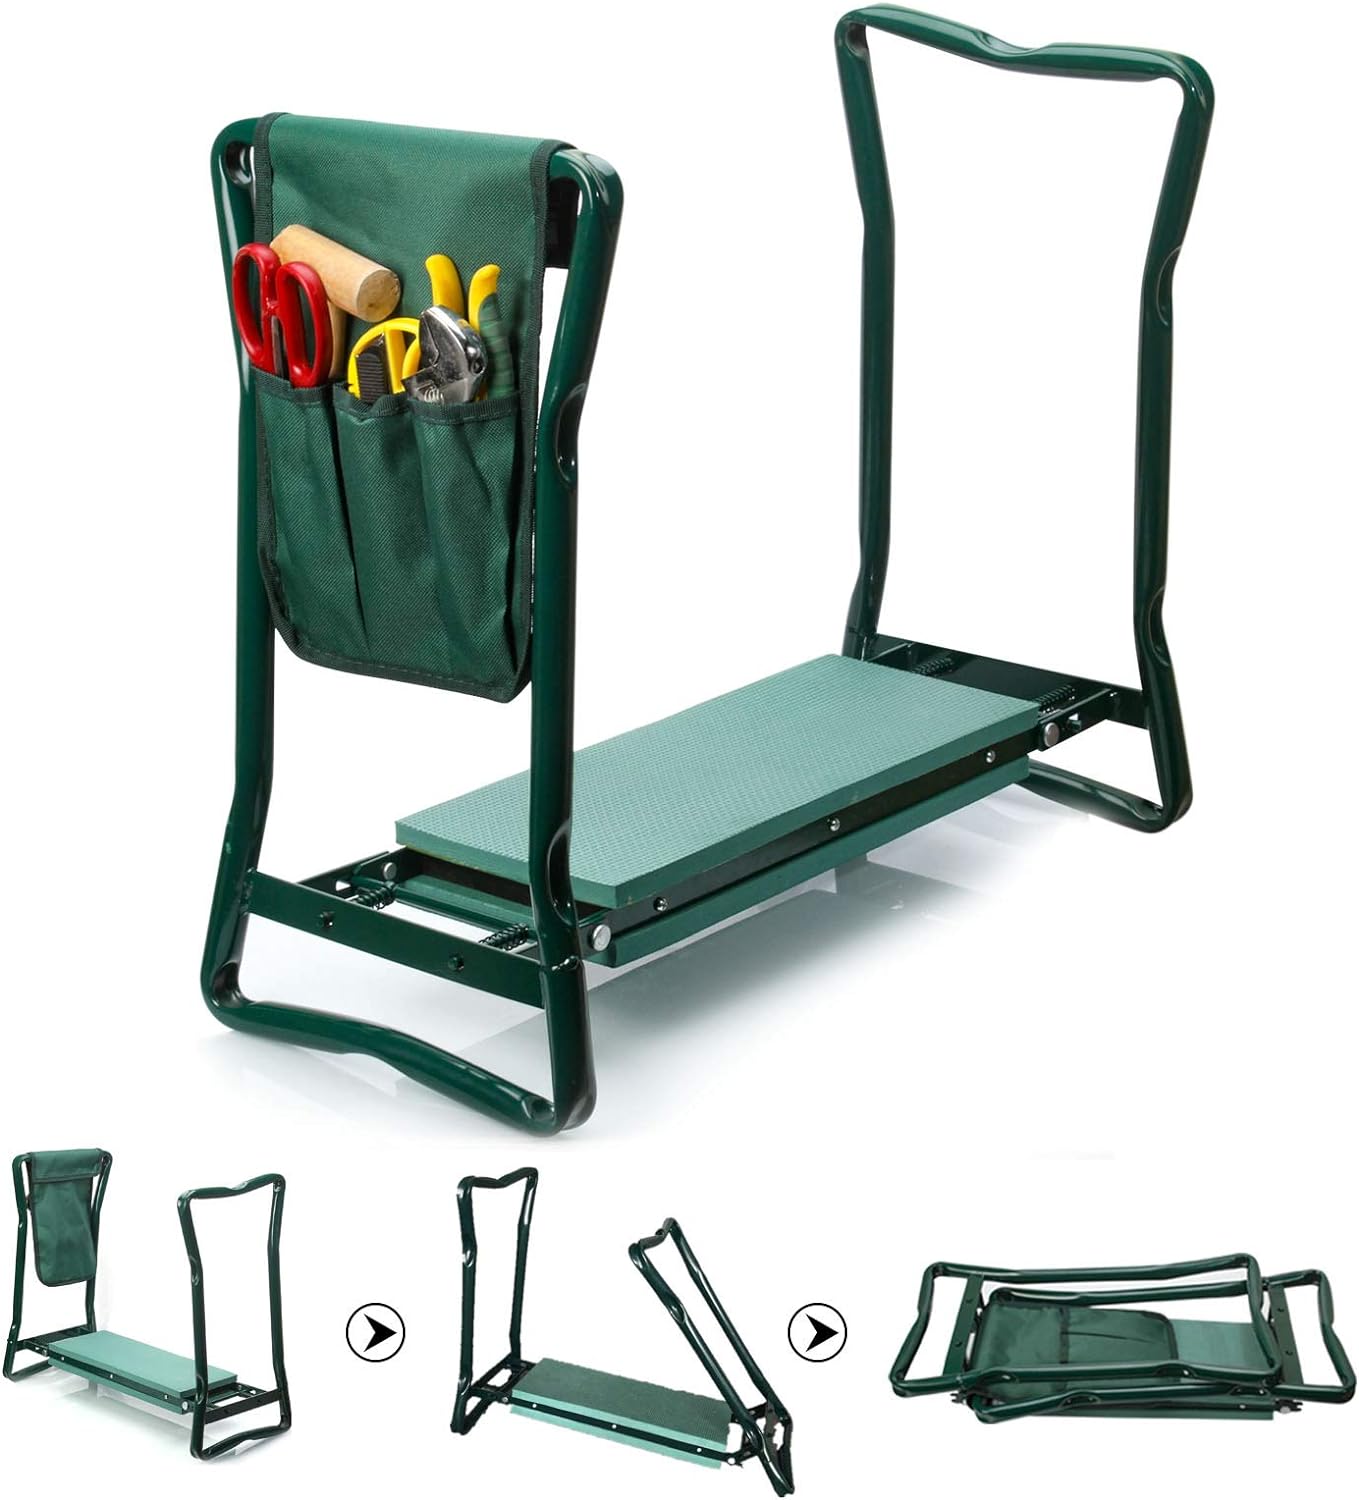 2-in-1 Garden Kneeler & Seat with Pouch (50% OFF)